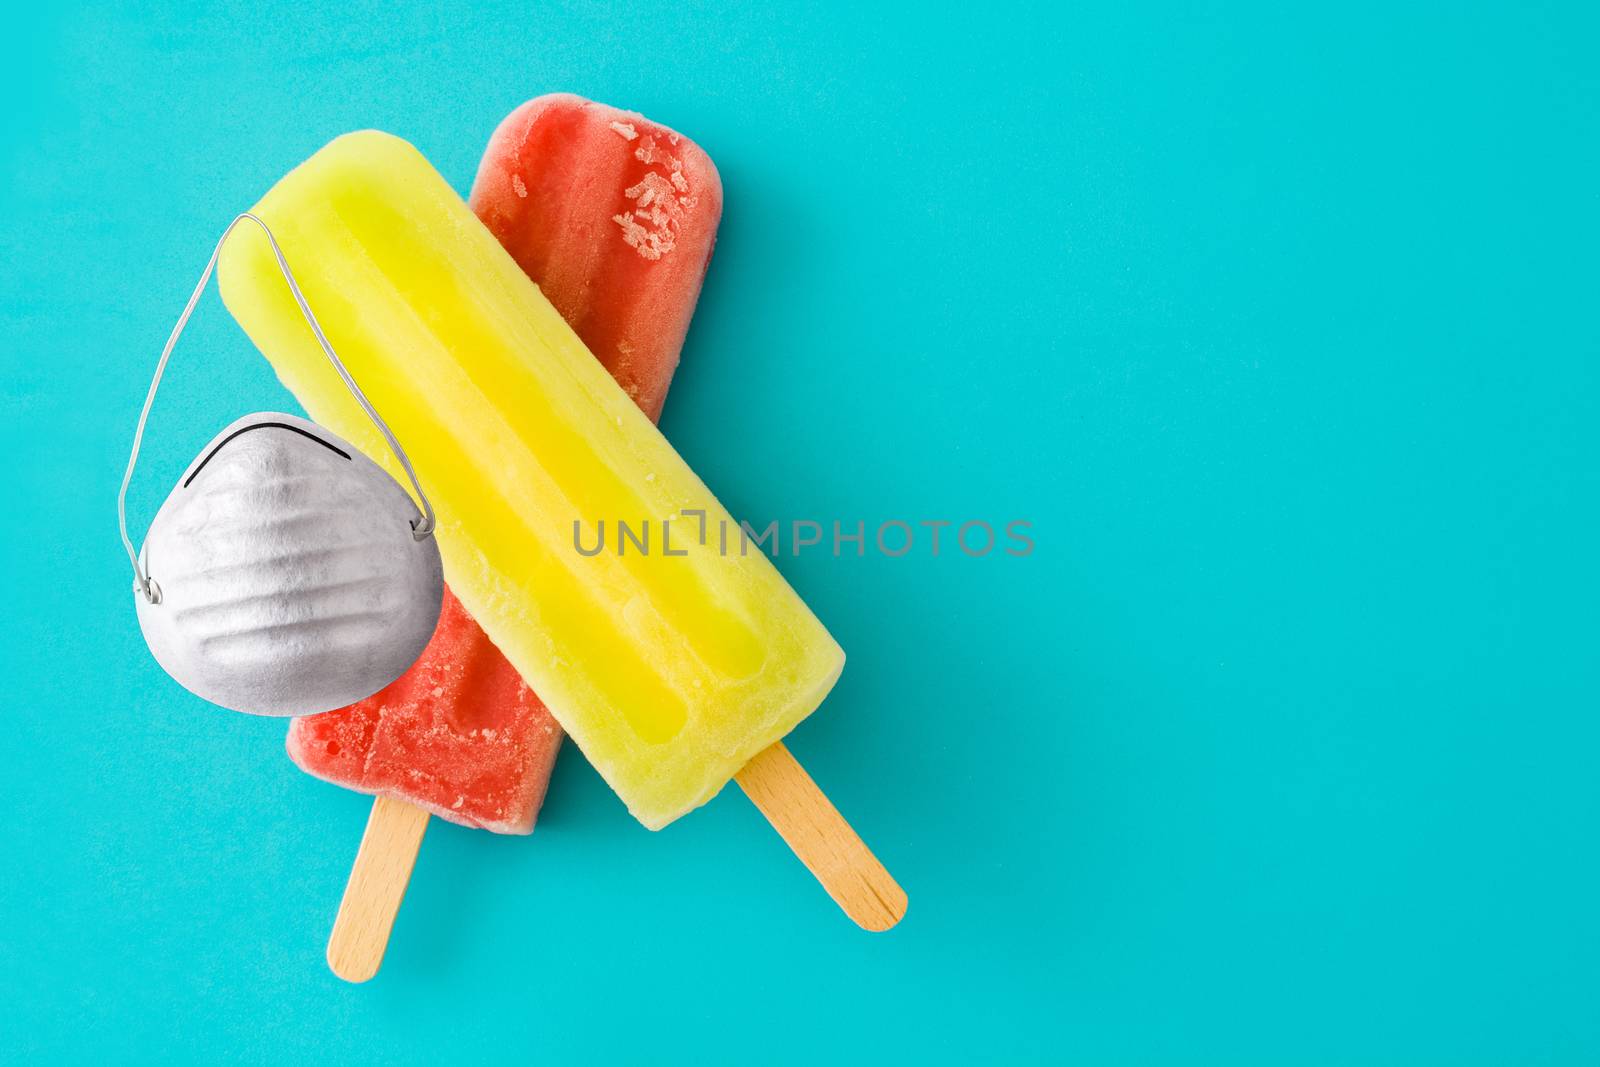 Lemon and strawberry popsicles with protective face mask on blue background